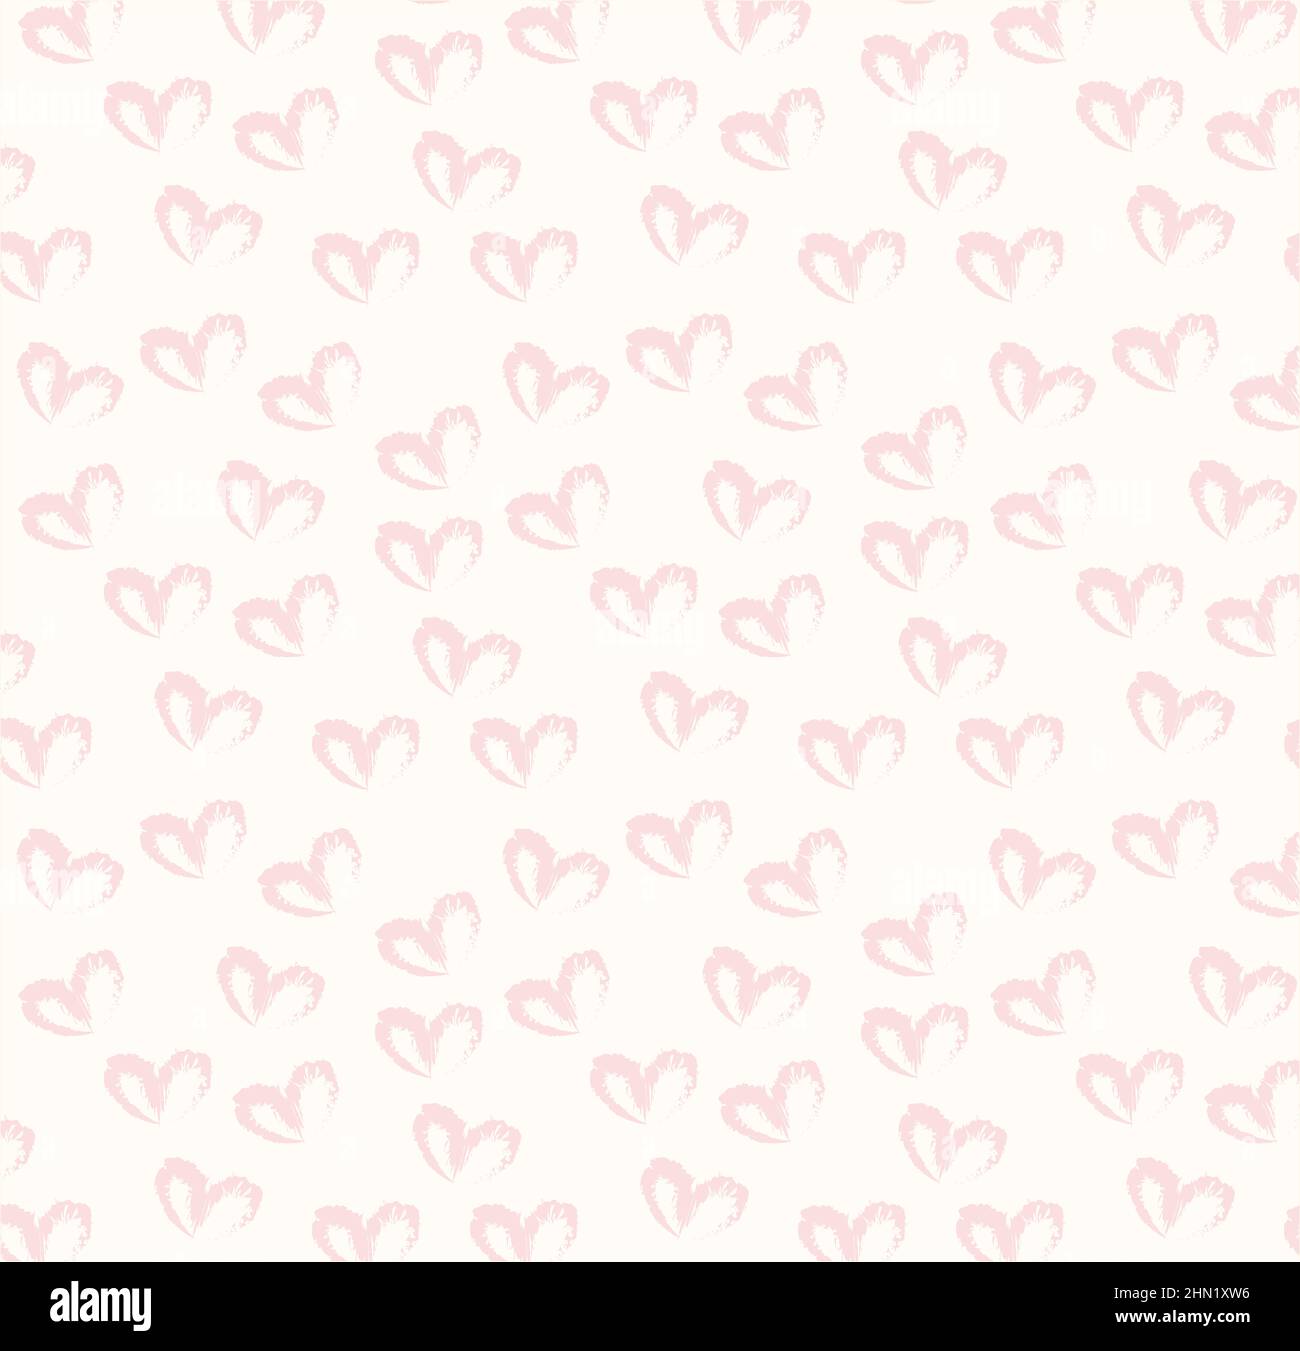 Seamless pattern of hand drawn simple hearts in pastel red color on beige and neutral background Stock Photo